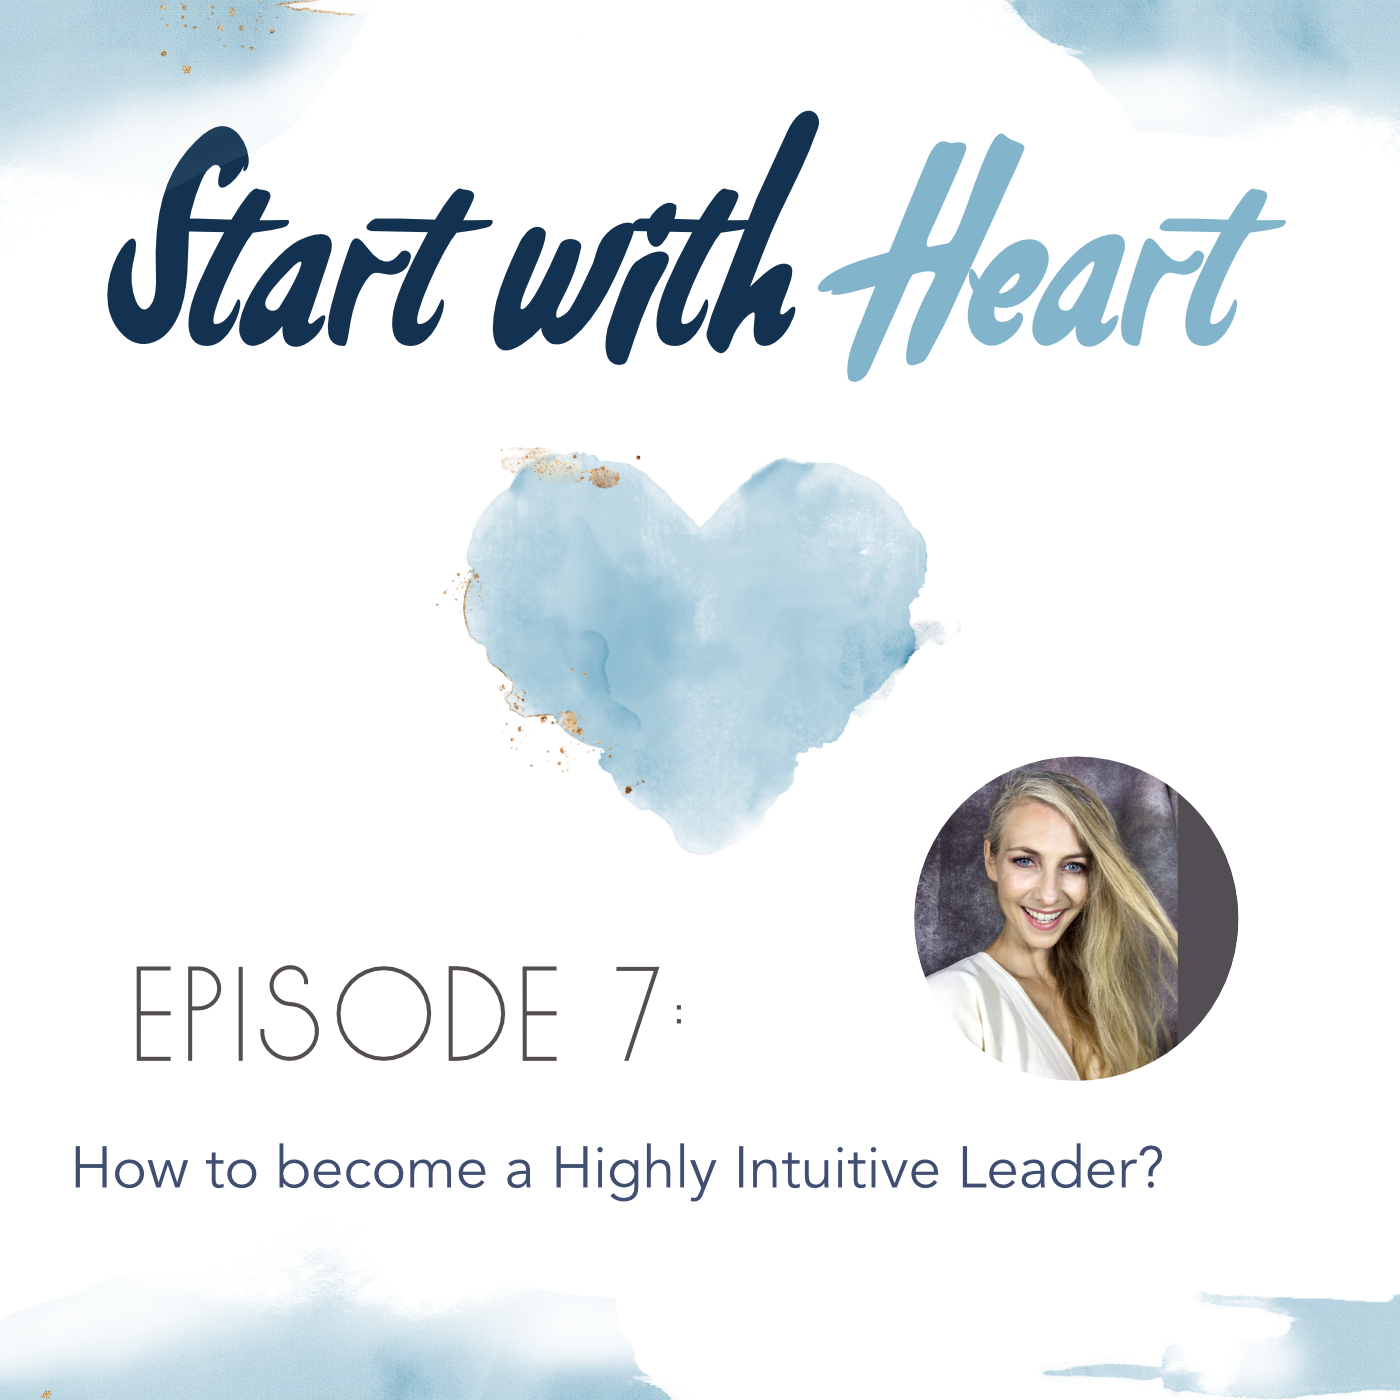 How to Become a Highly Intuitive Leader?